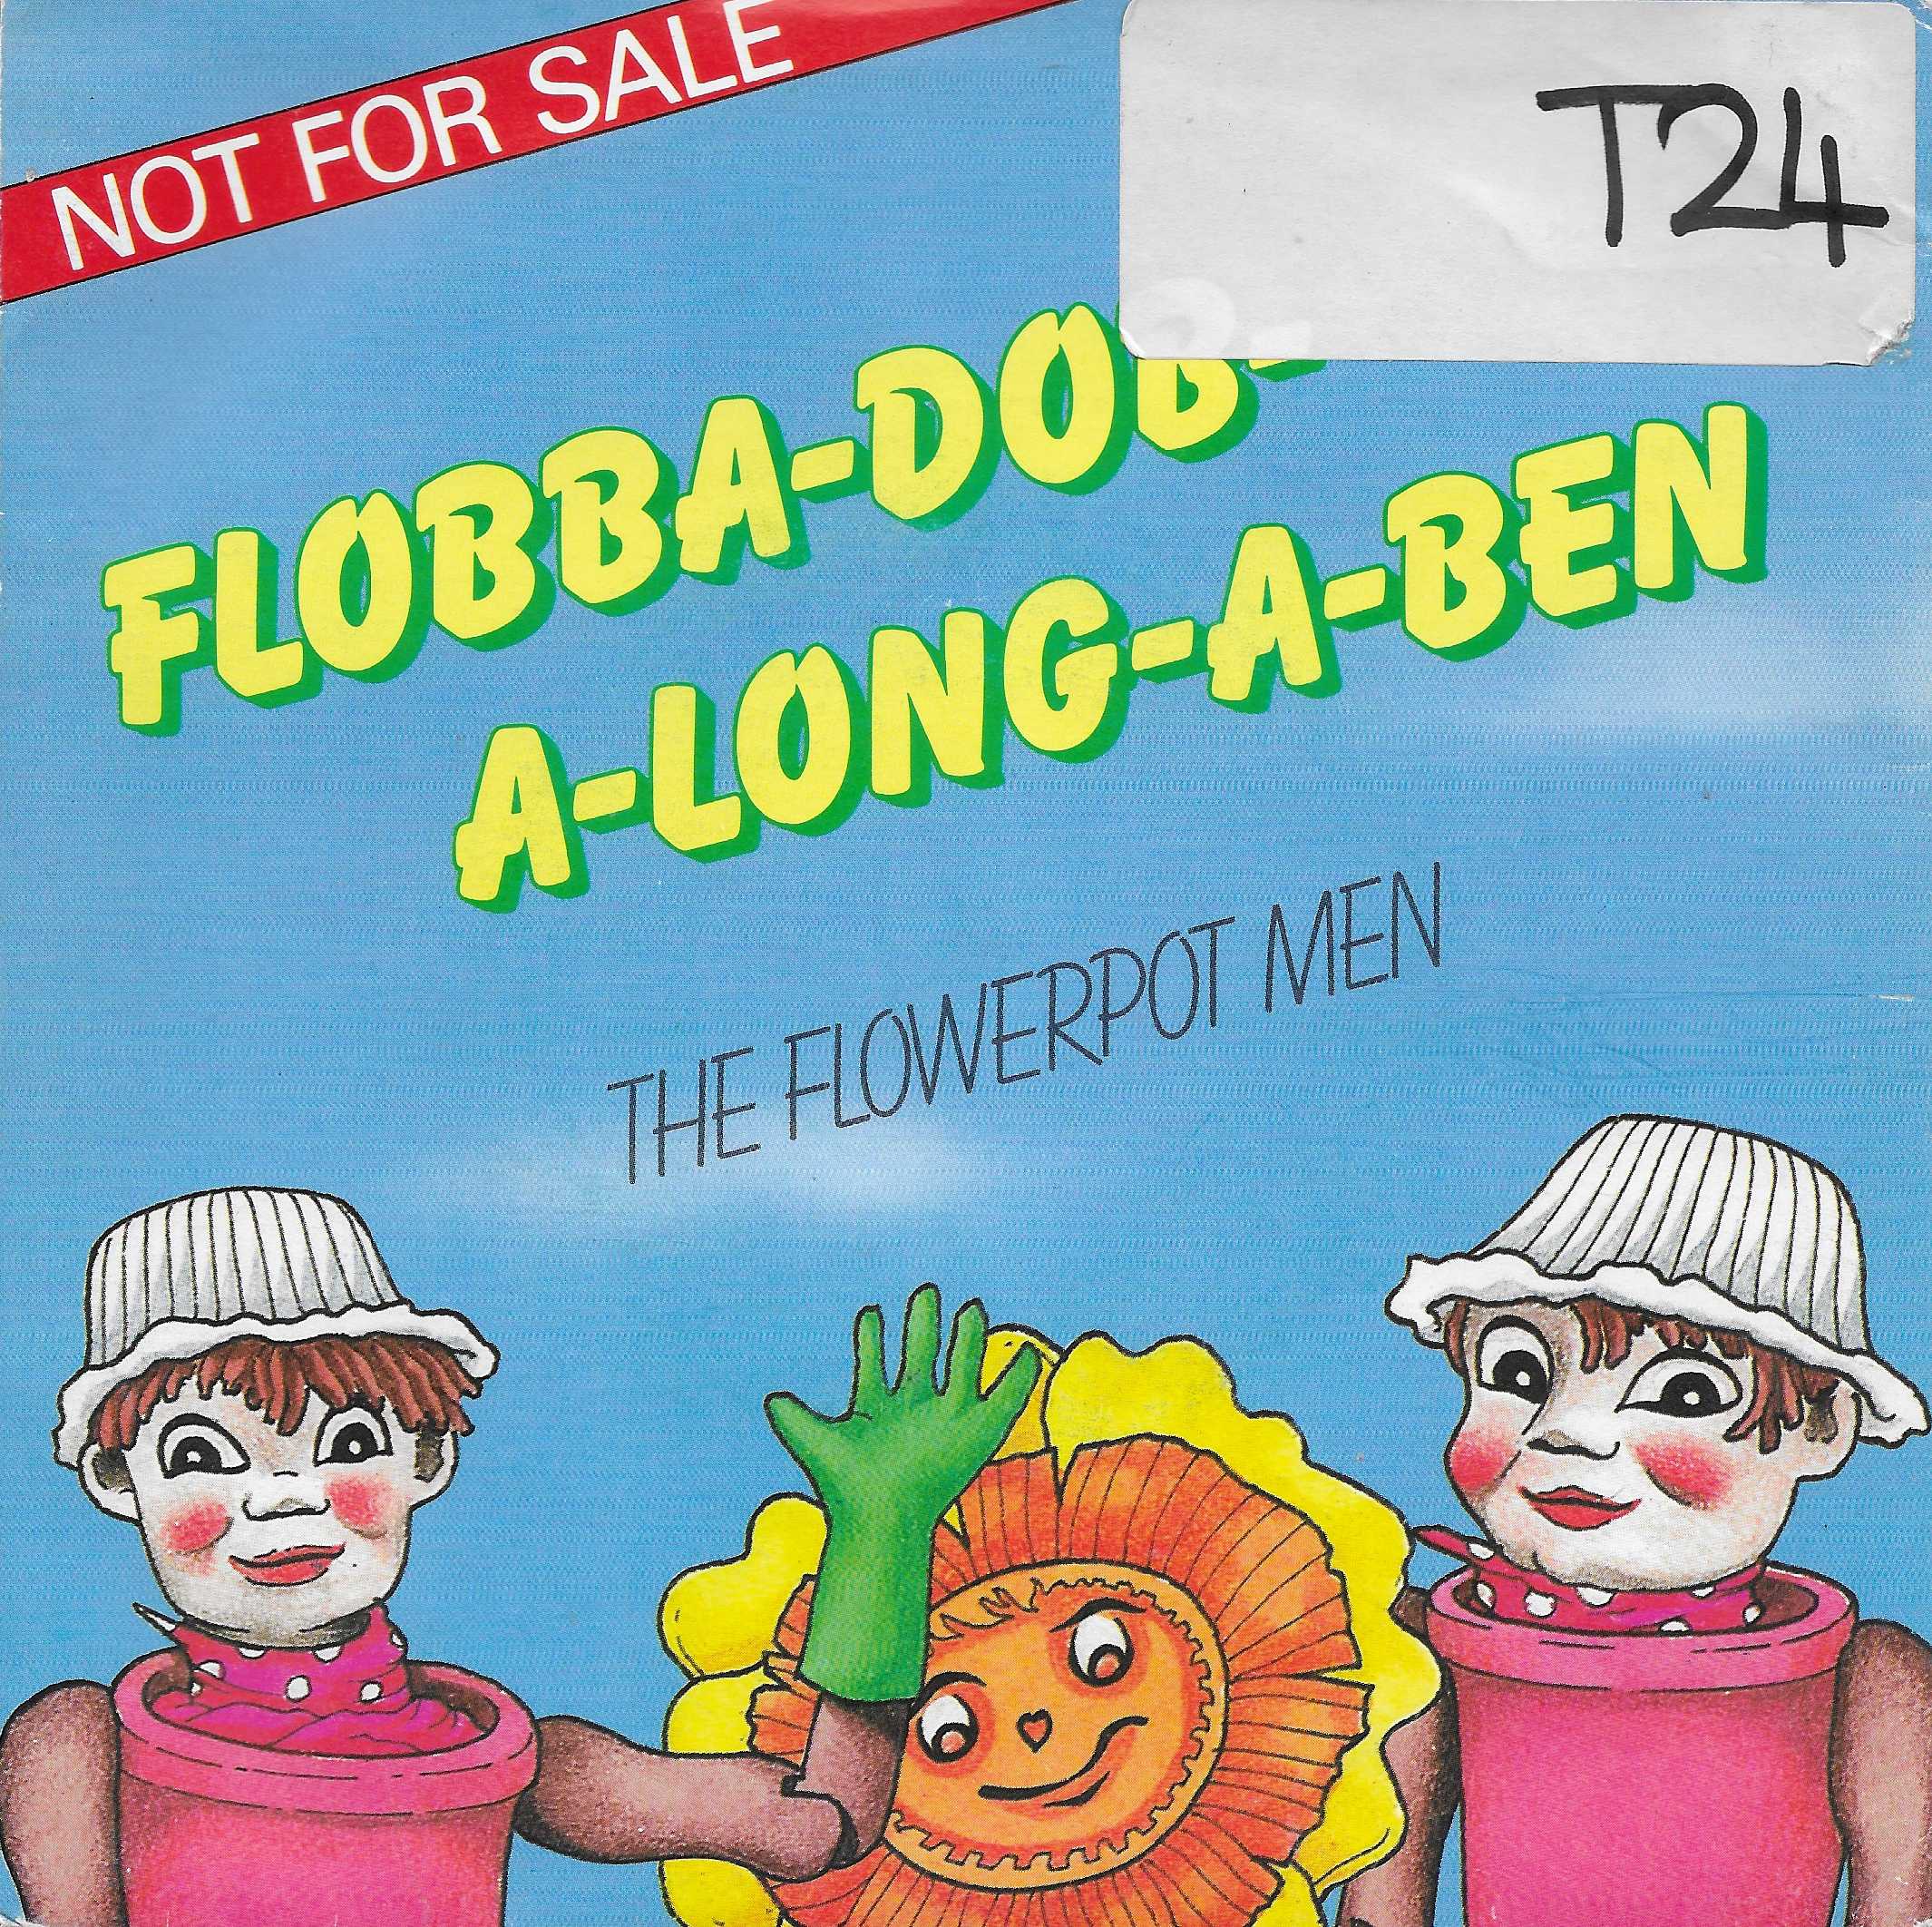 Picture of Flobba-Dob-A-Long-A-Ben (The Flower Pot Men) by artist Grahame Lister / John OConnor from the BBC singles - Records and Tapes library